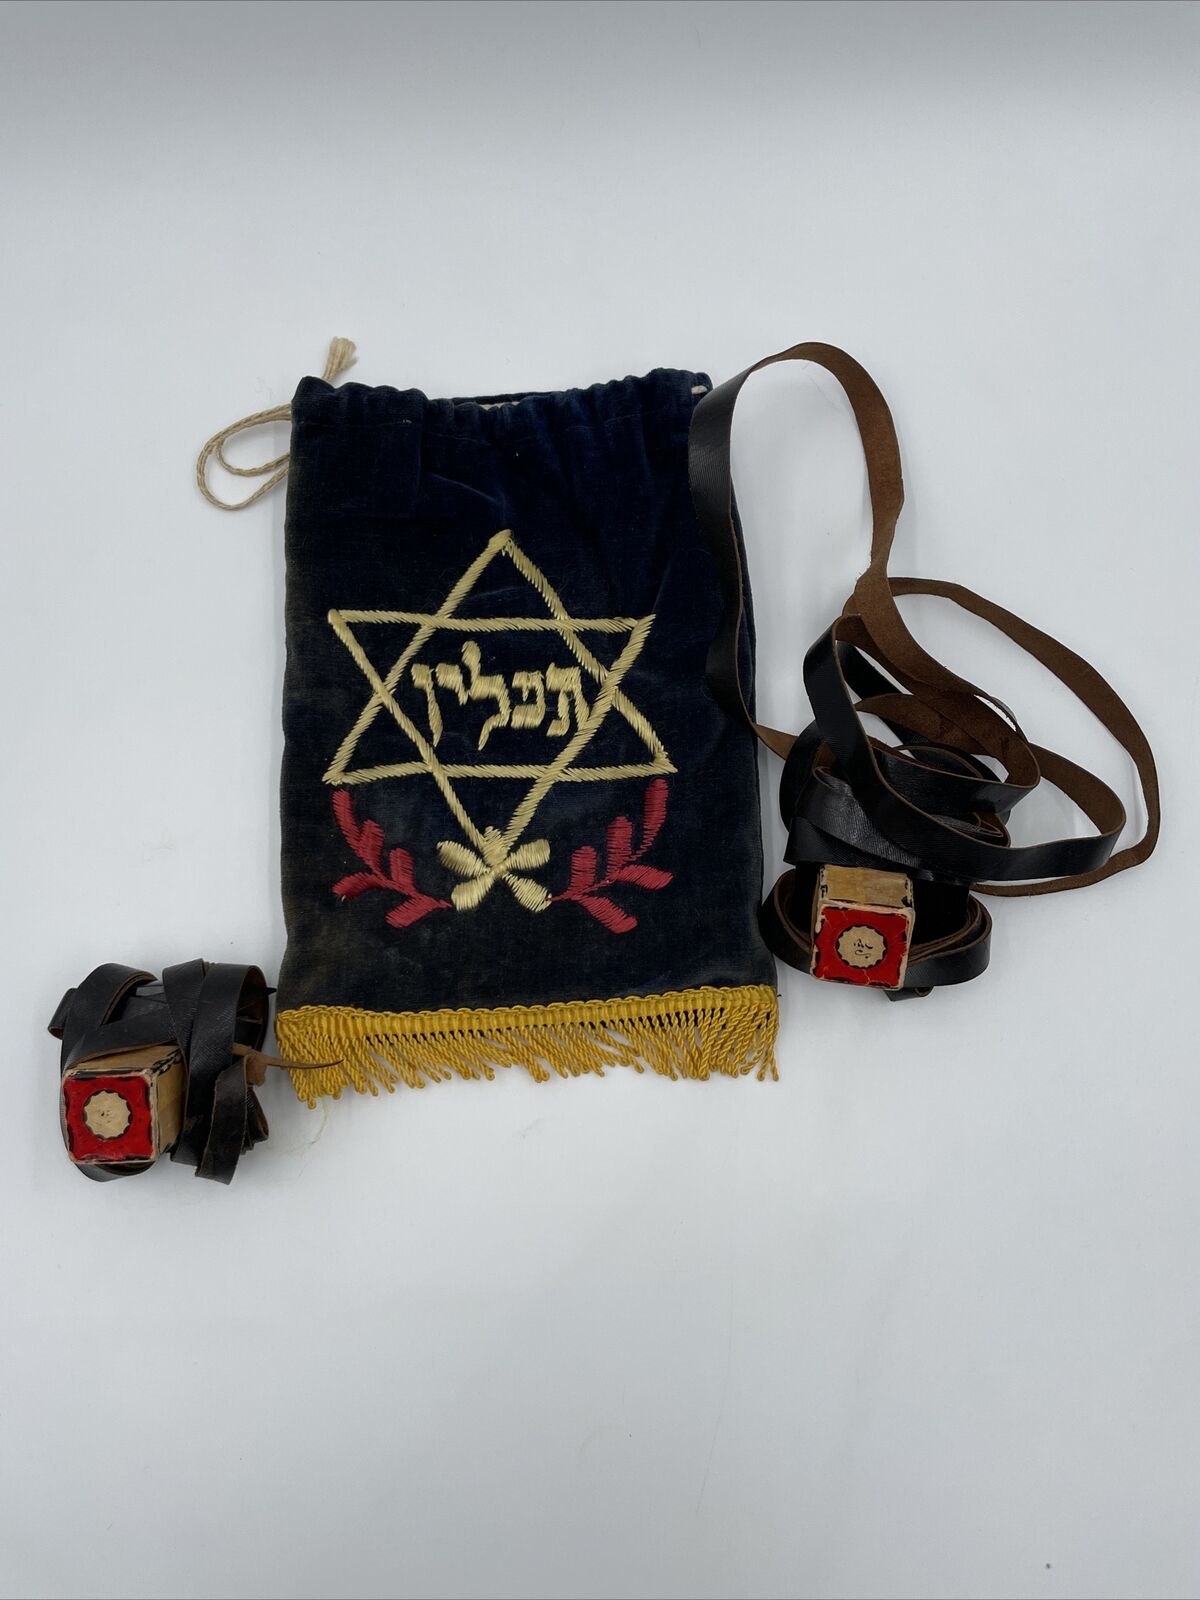 Antique Jewish Leather Tefillin with Embroidered Hand Stitches Fringed Cloth Bag